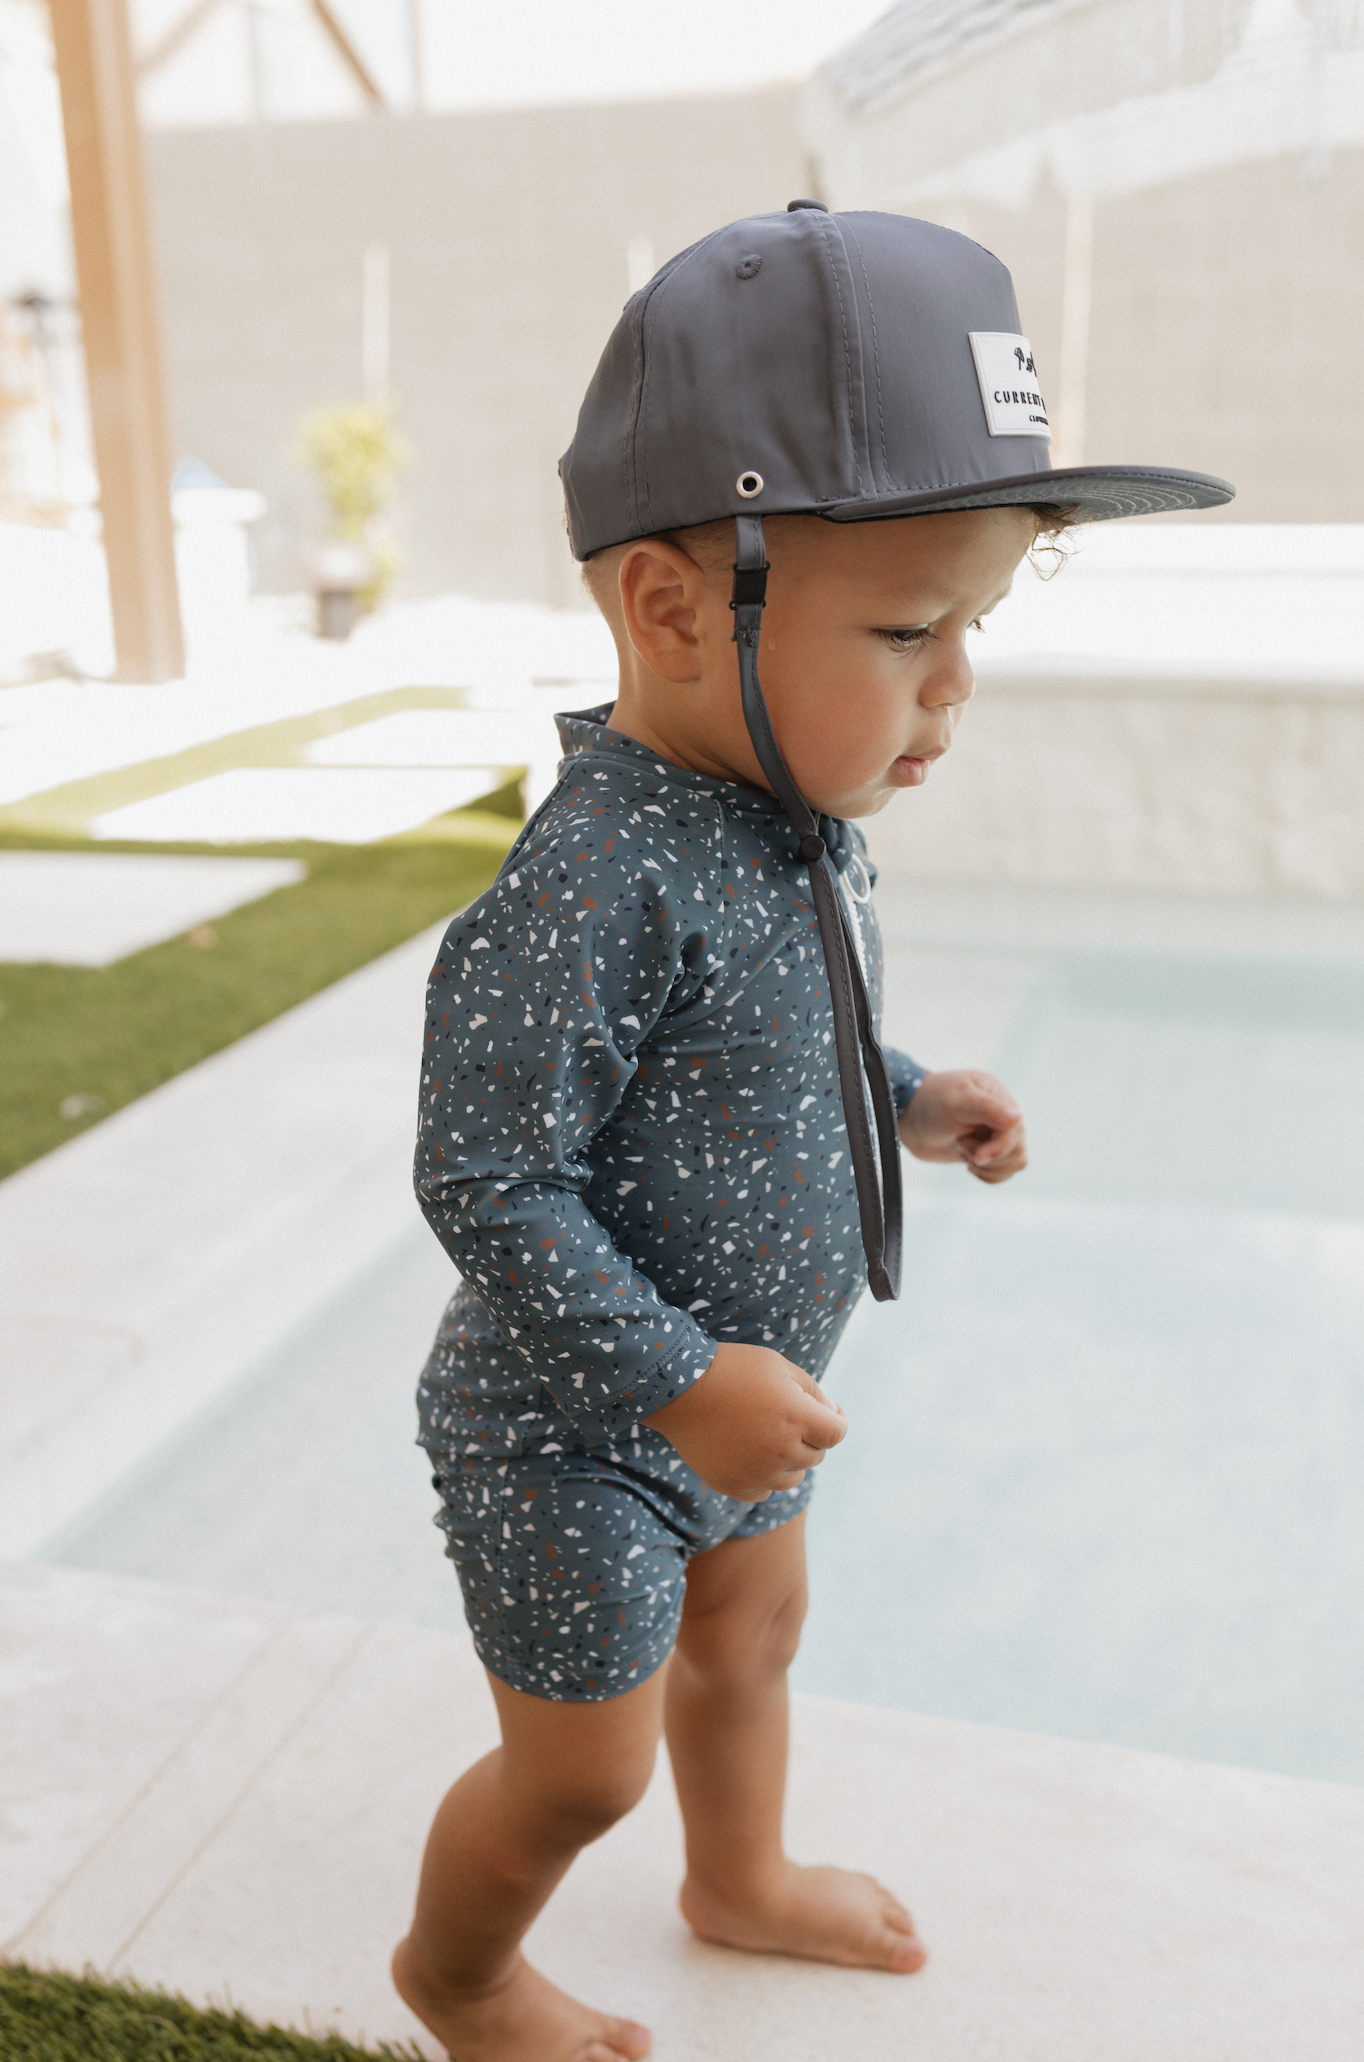 Current Tyed Clothing - The "Quinn" Sunsuit